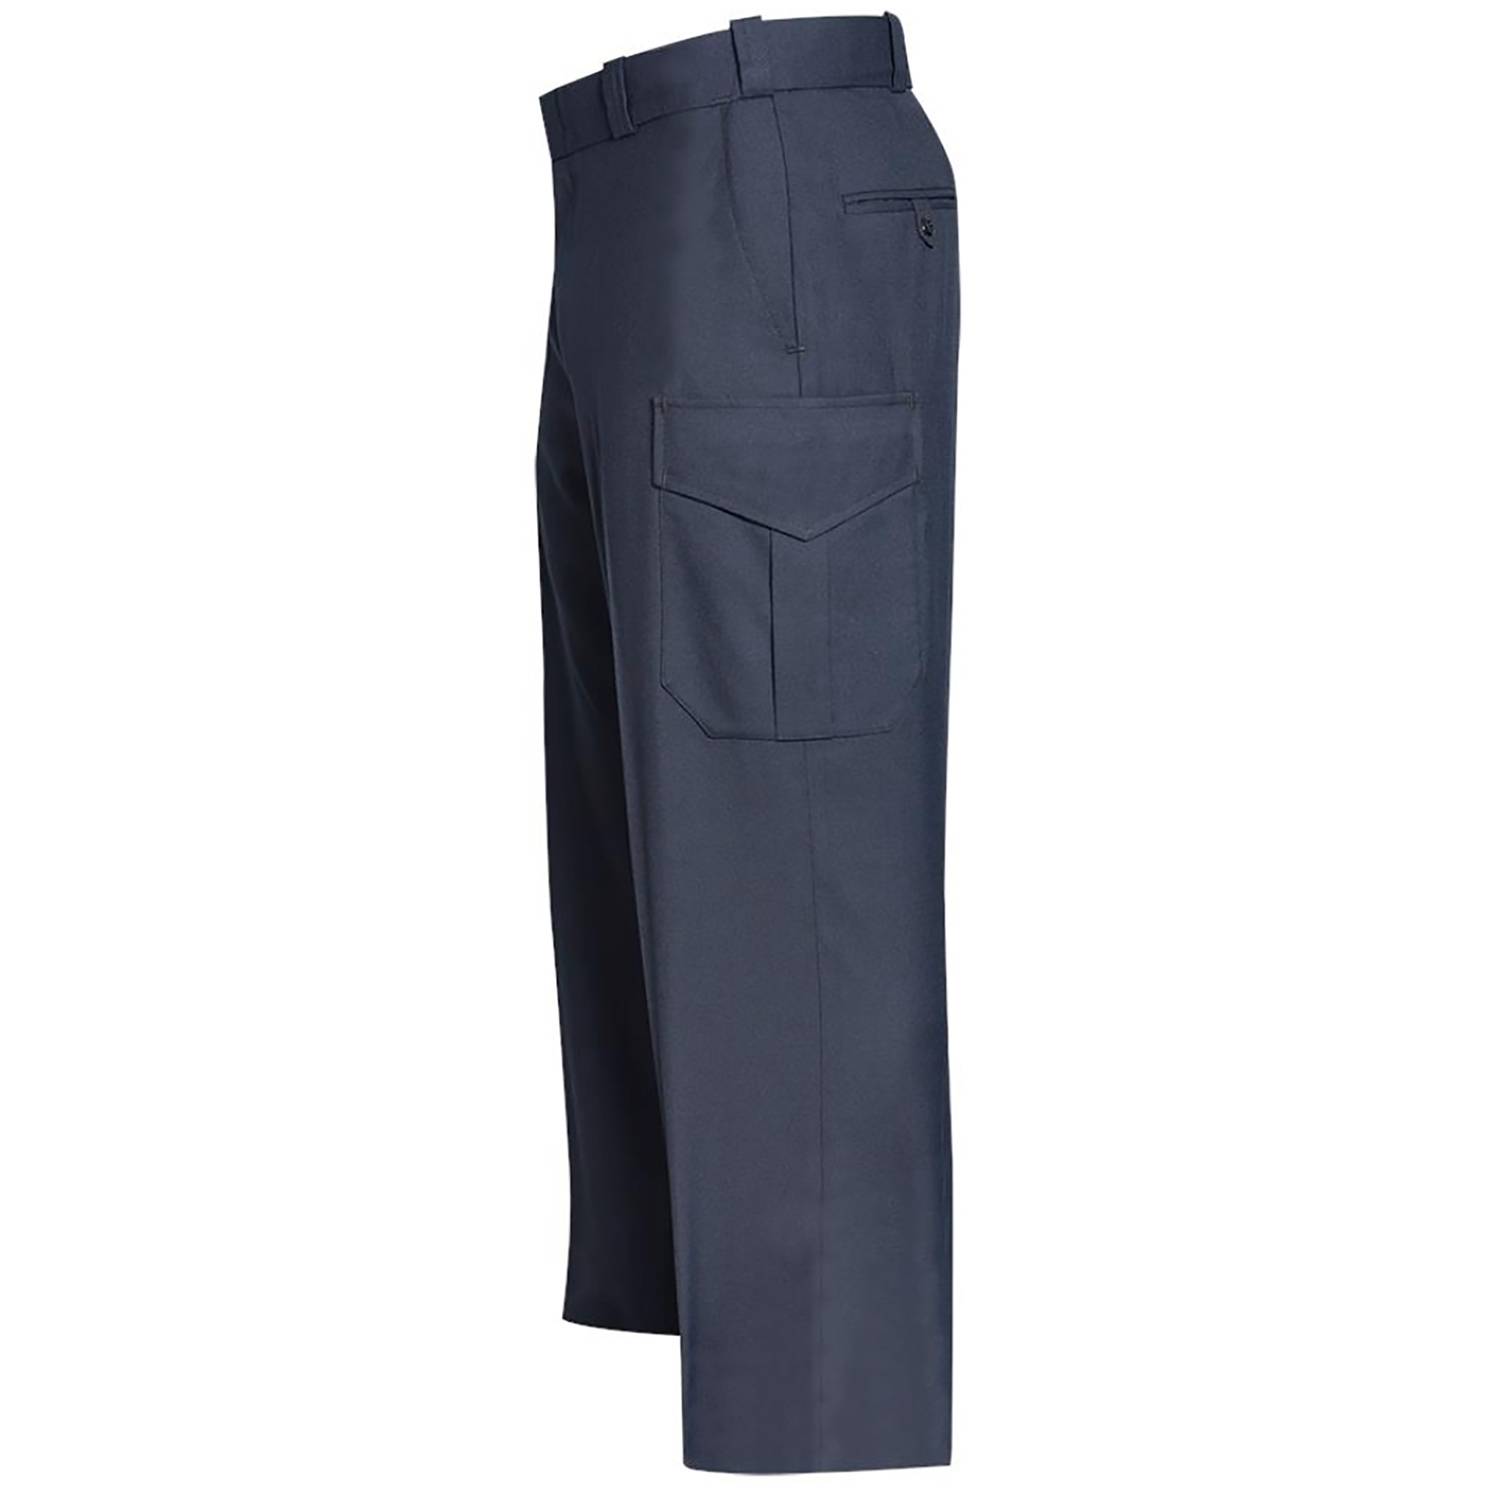 polyester cargo pants